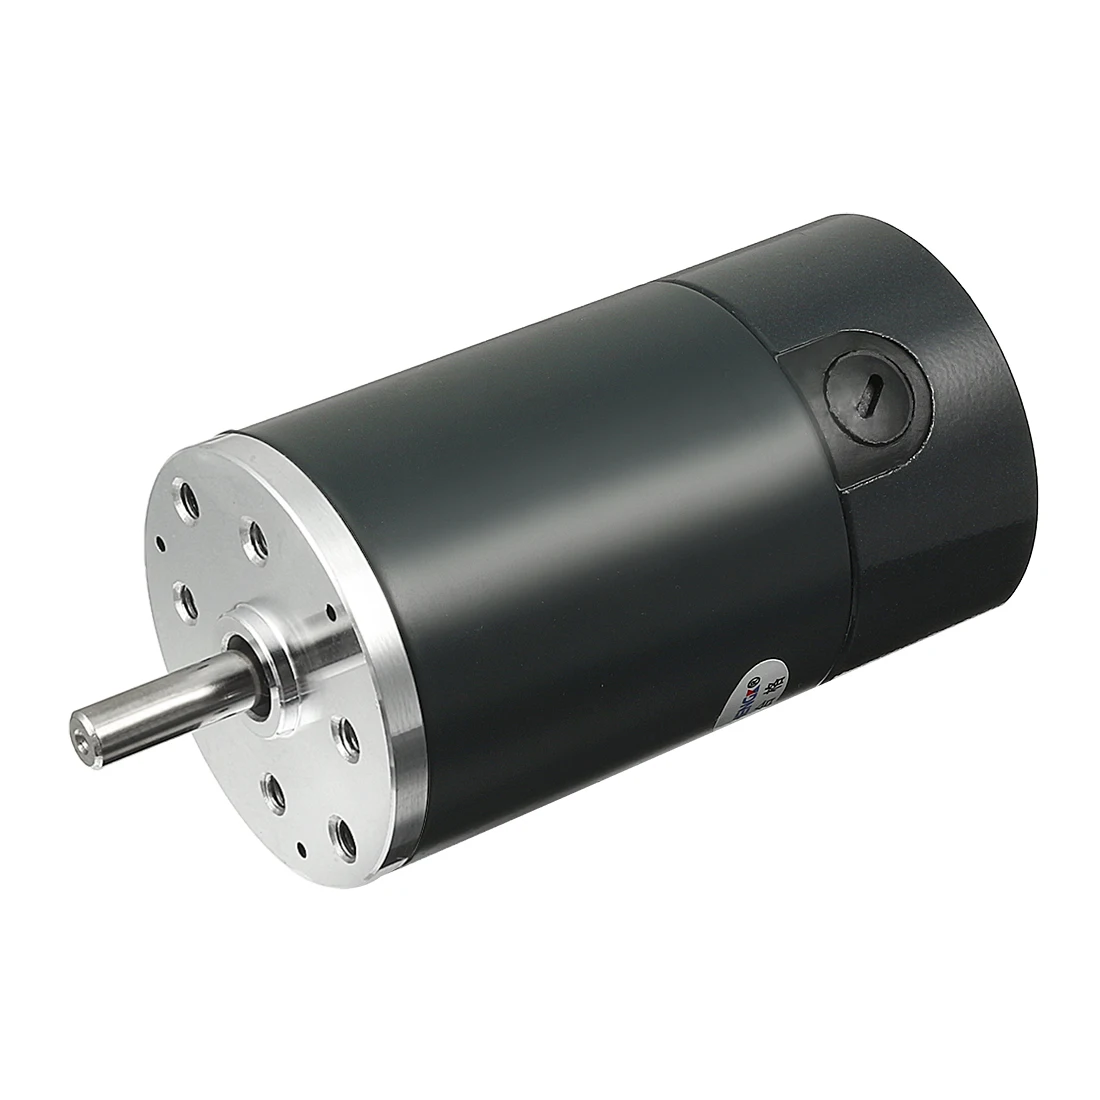 

1Pcs DC 12V 3000RPM Brushed Electric Motor 45mm CCW Cylindrical Shape Motor Replacement for Damaged Machine DC Motor